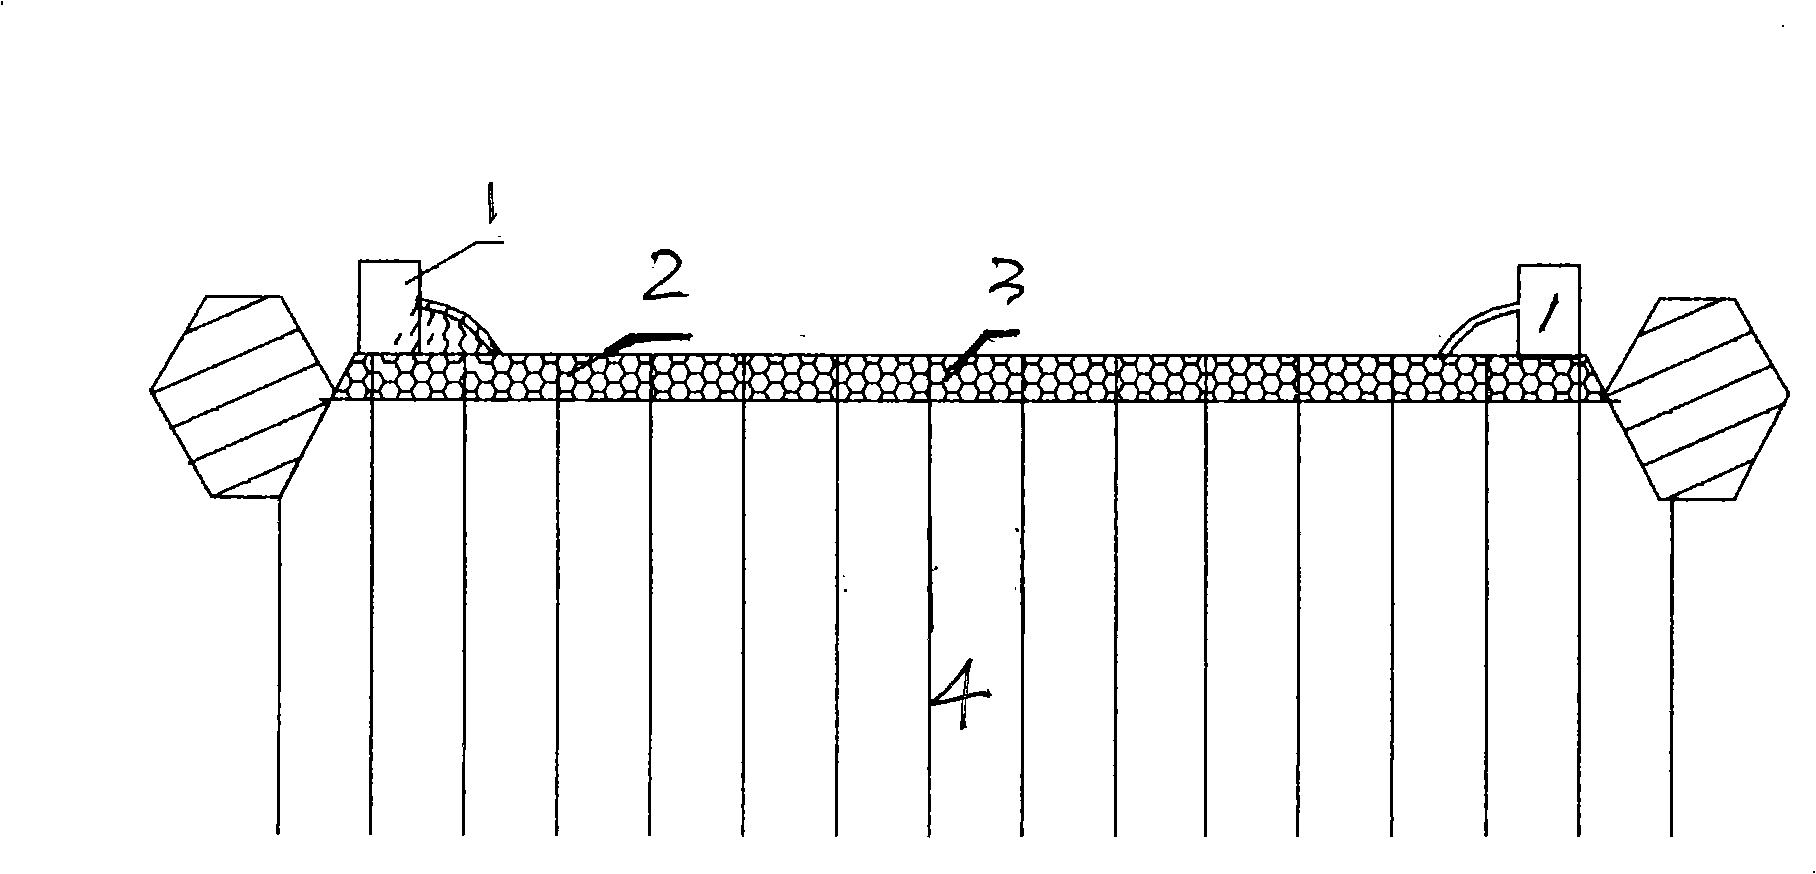 Technical method for reinforcing foundation by circulating bedding course drainage preloading